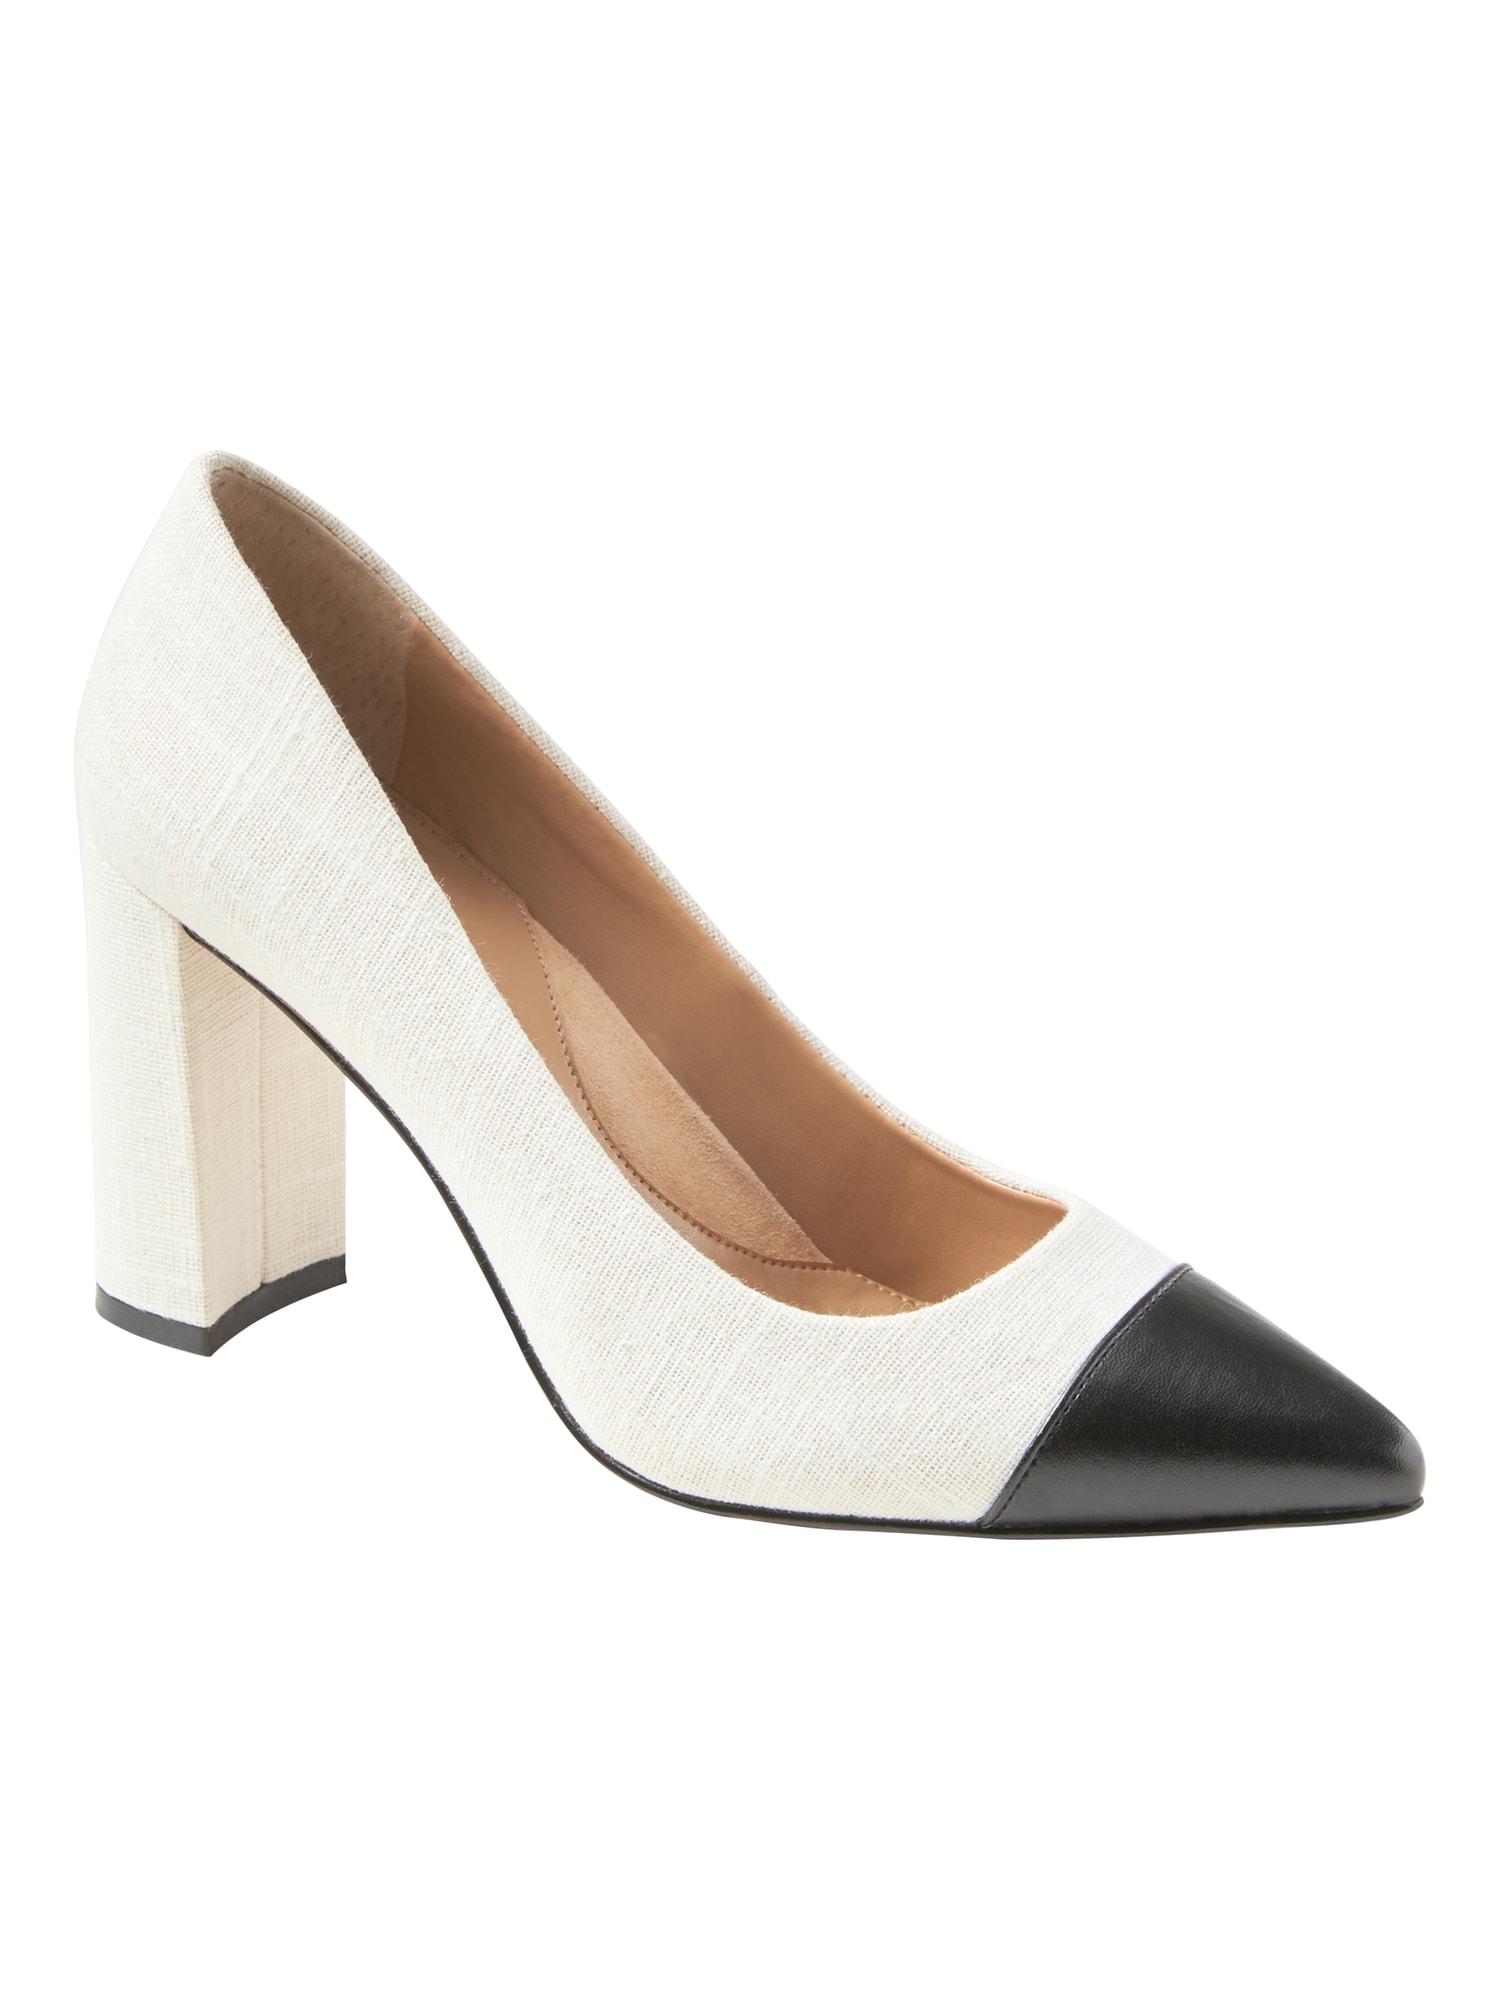 black and white block heel shoes